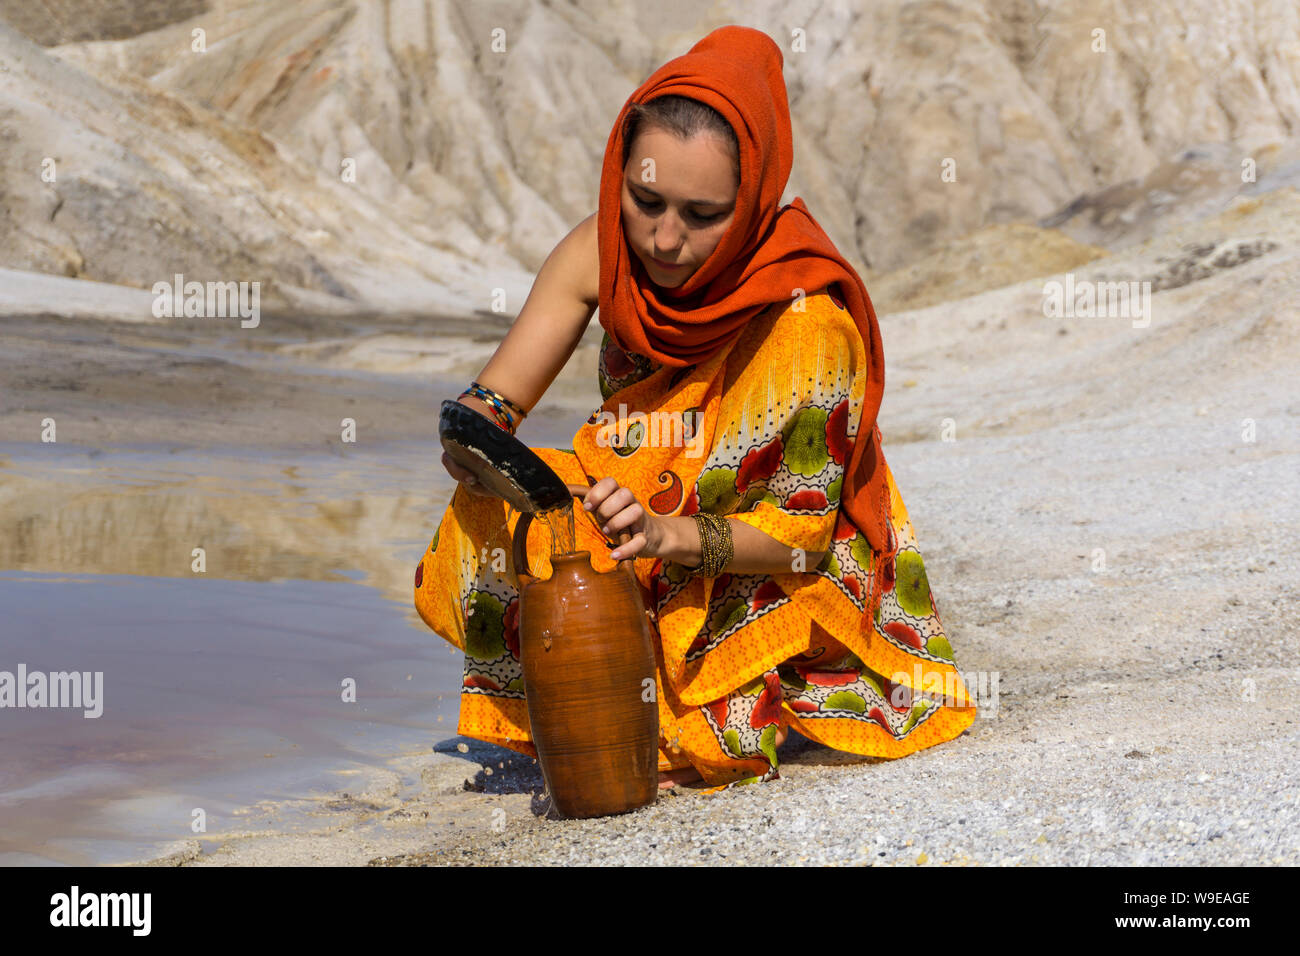 girl of oriental appearance in sari and hijab fills the pitcher with water from a dirty source in the arid area Stock Photo